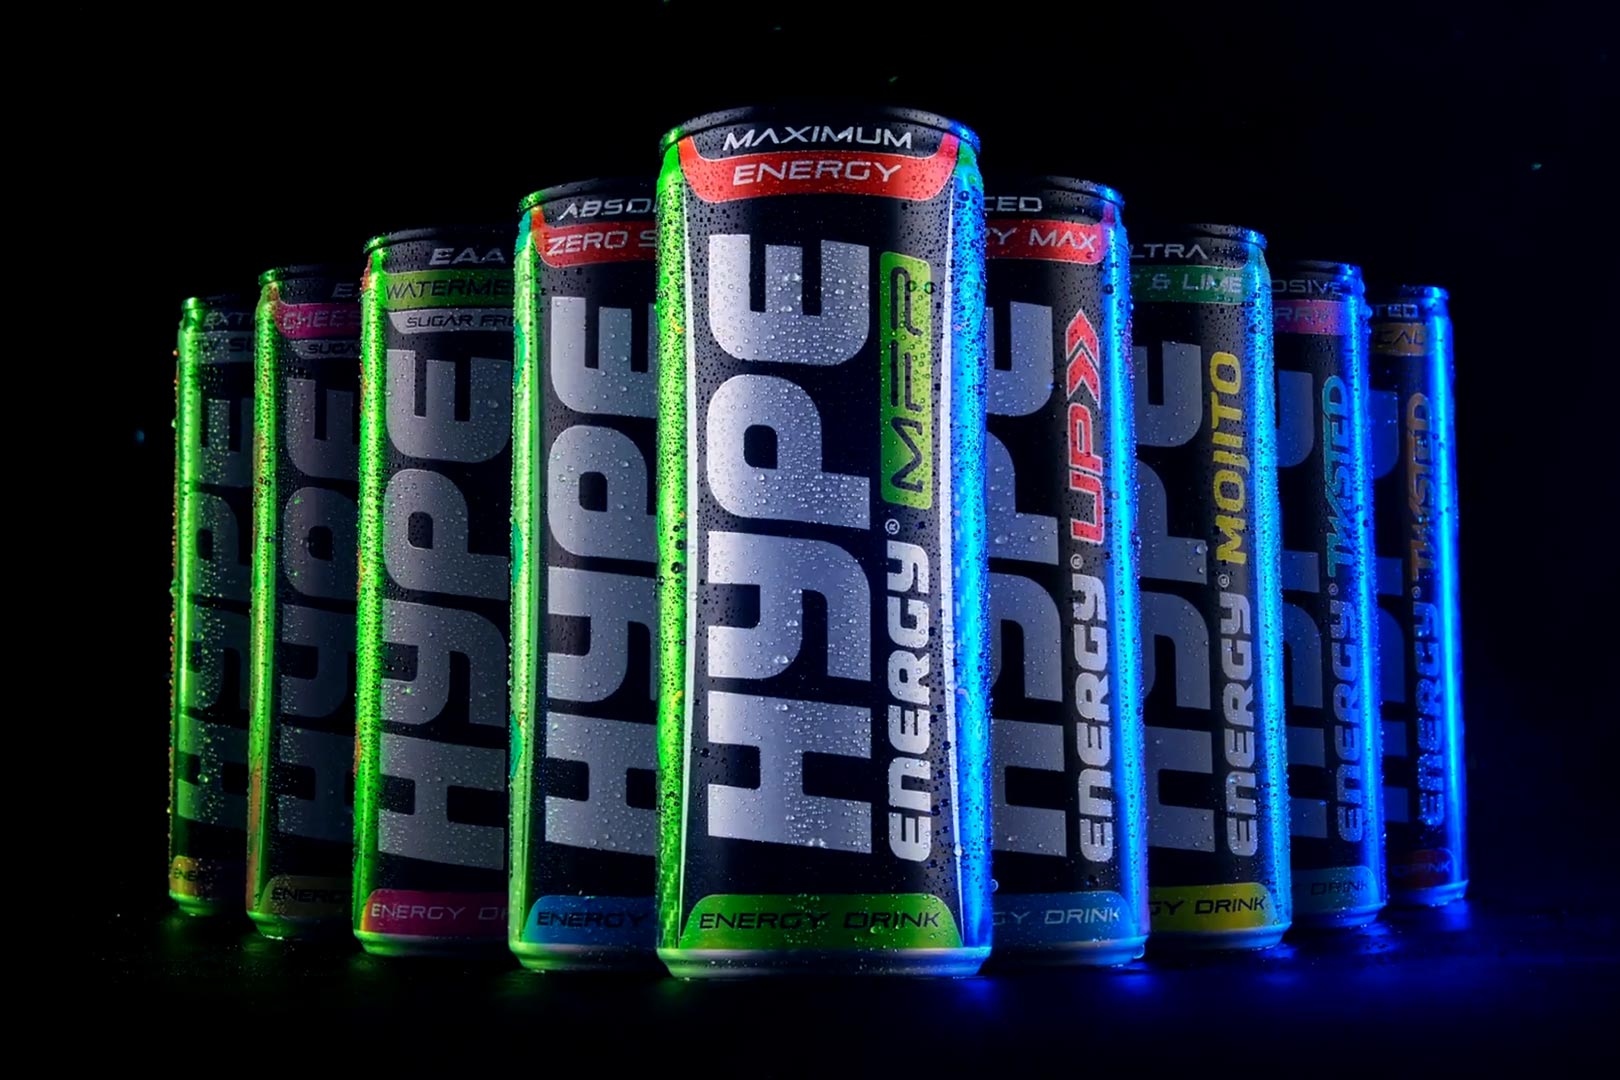 Hype Energy Drink Getting Into Supplements